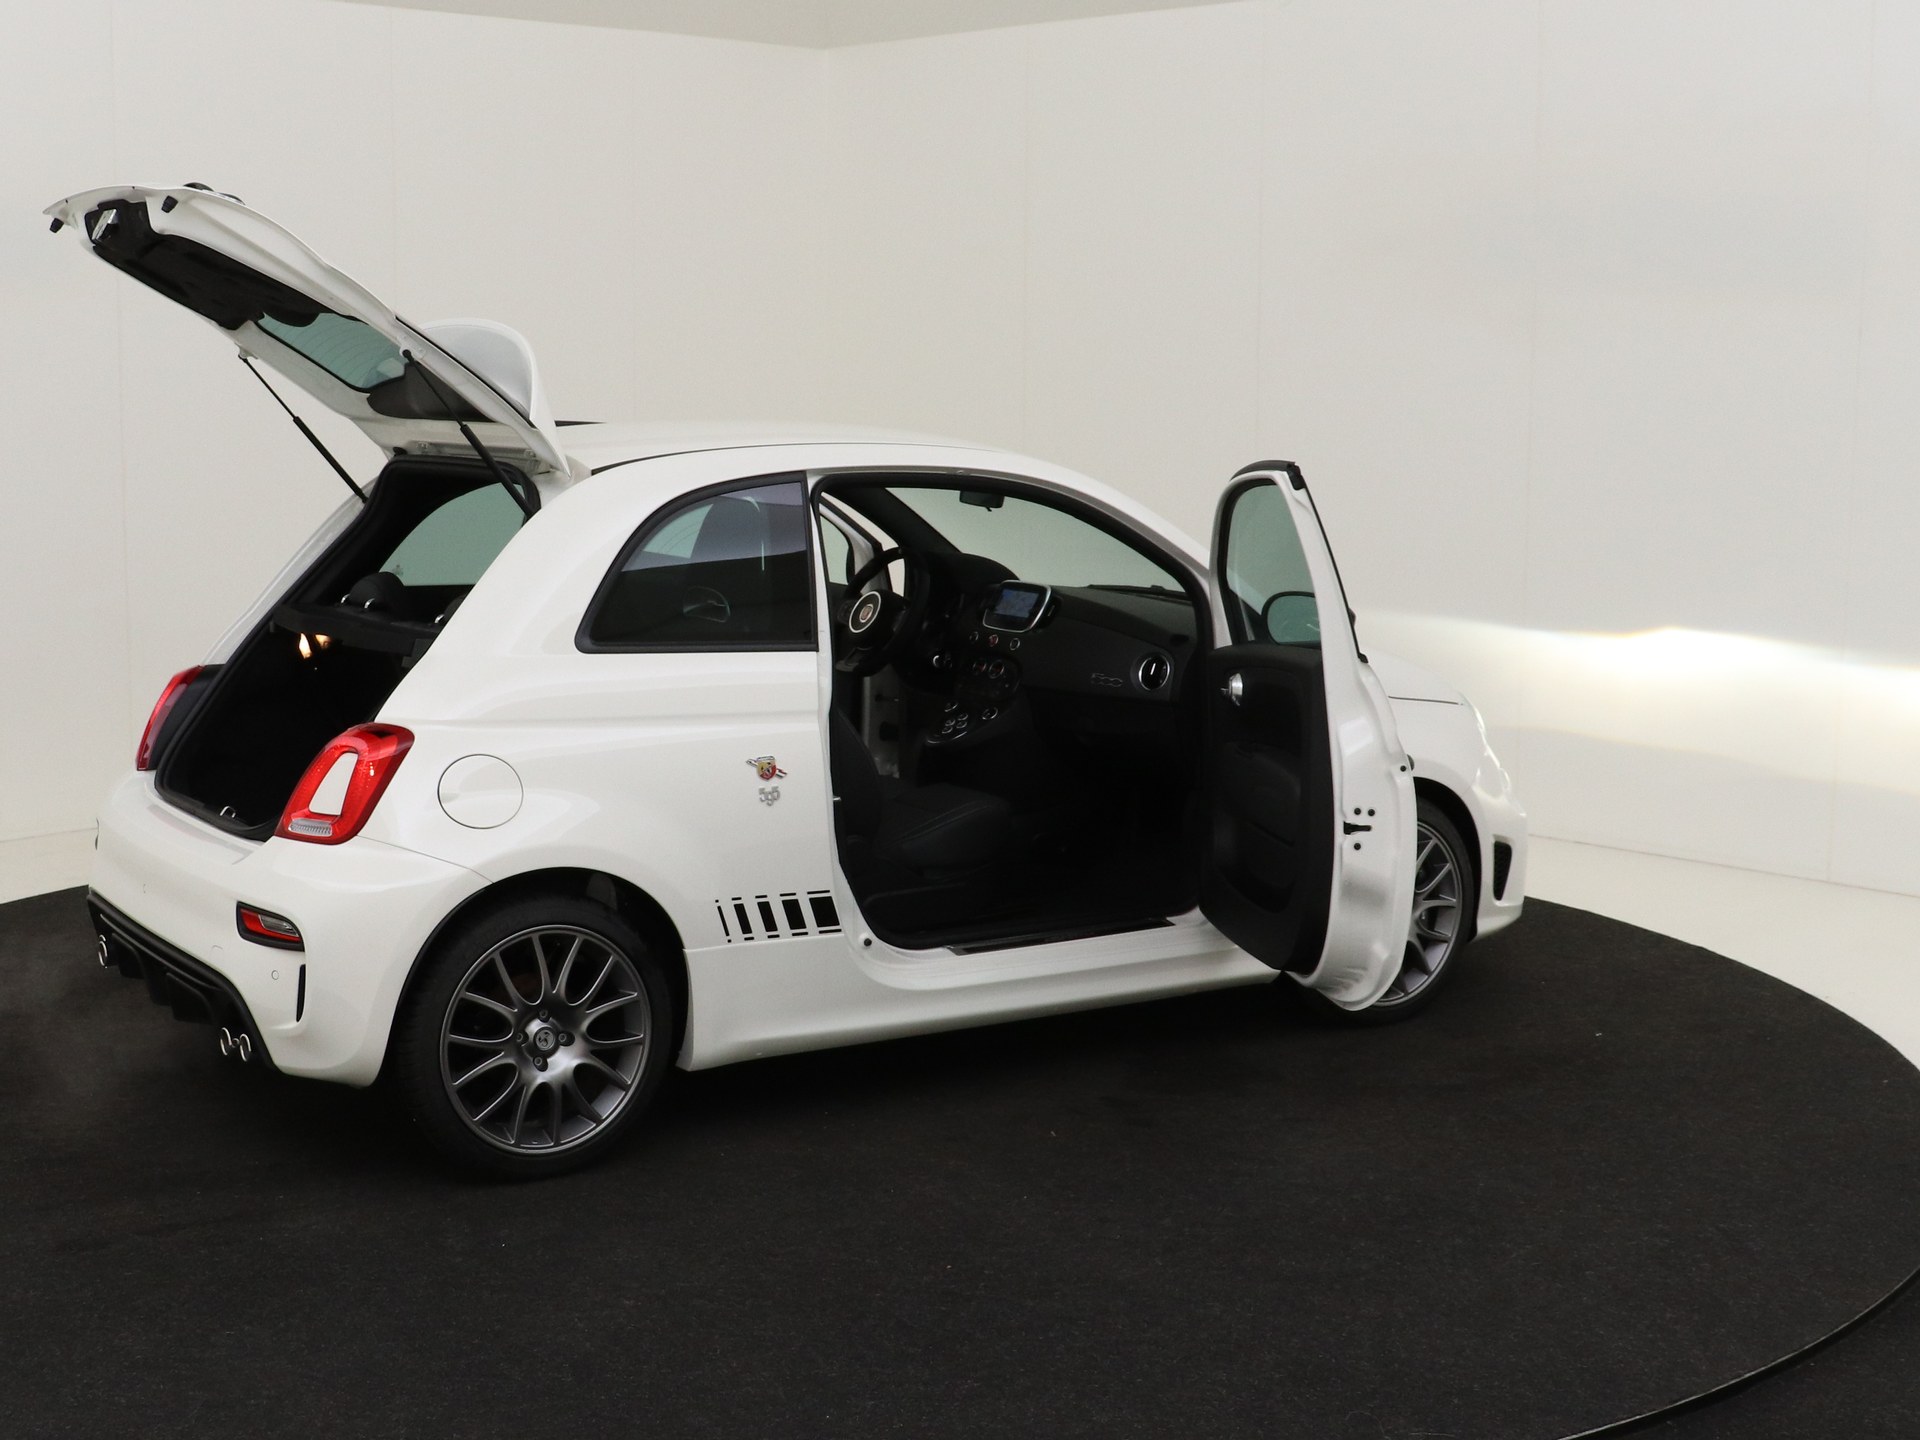 Abarth 595 1.4 180PK Competitione AUT van CarSelexy dealer Centrale Voorraad in 